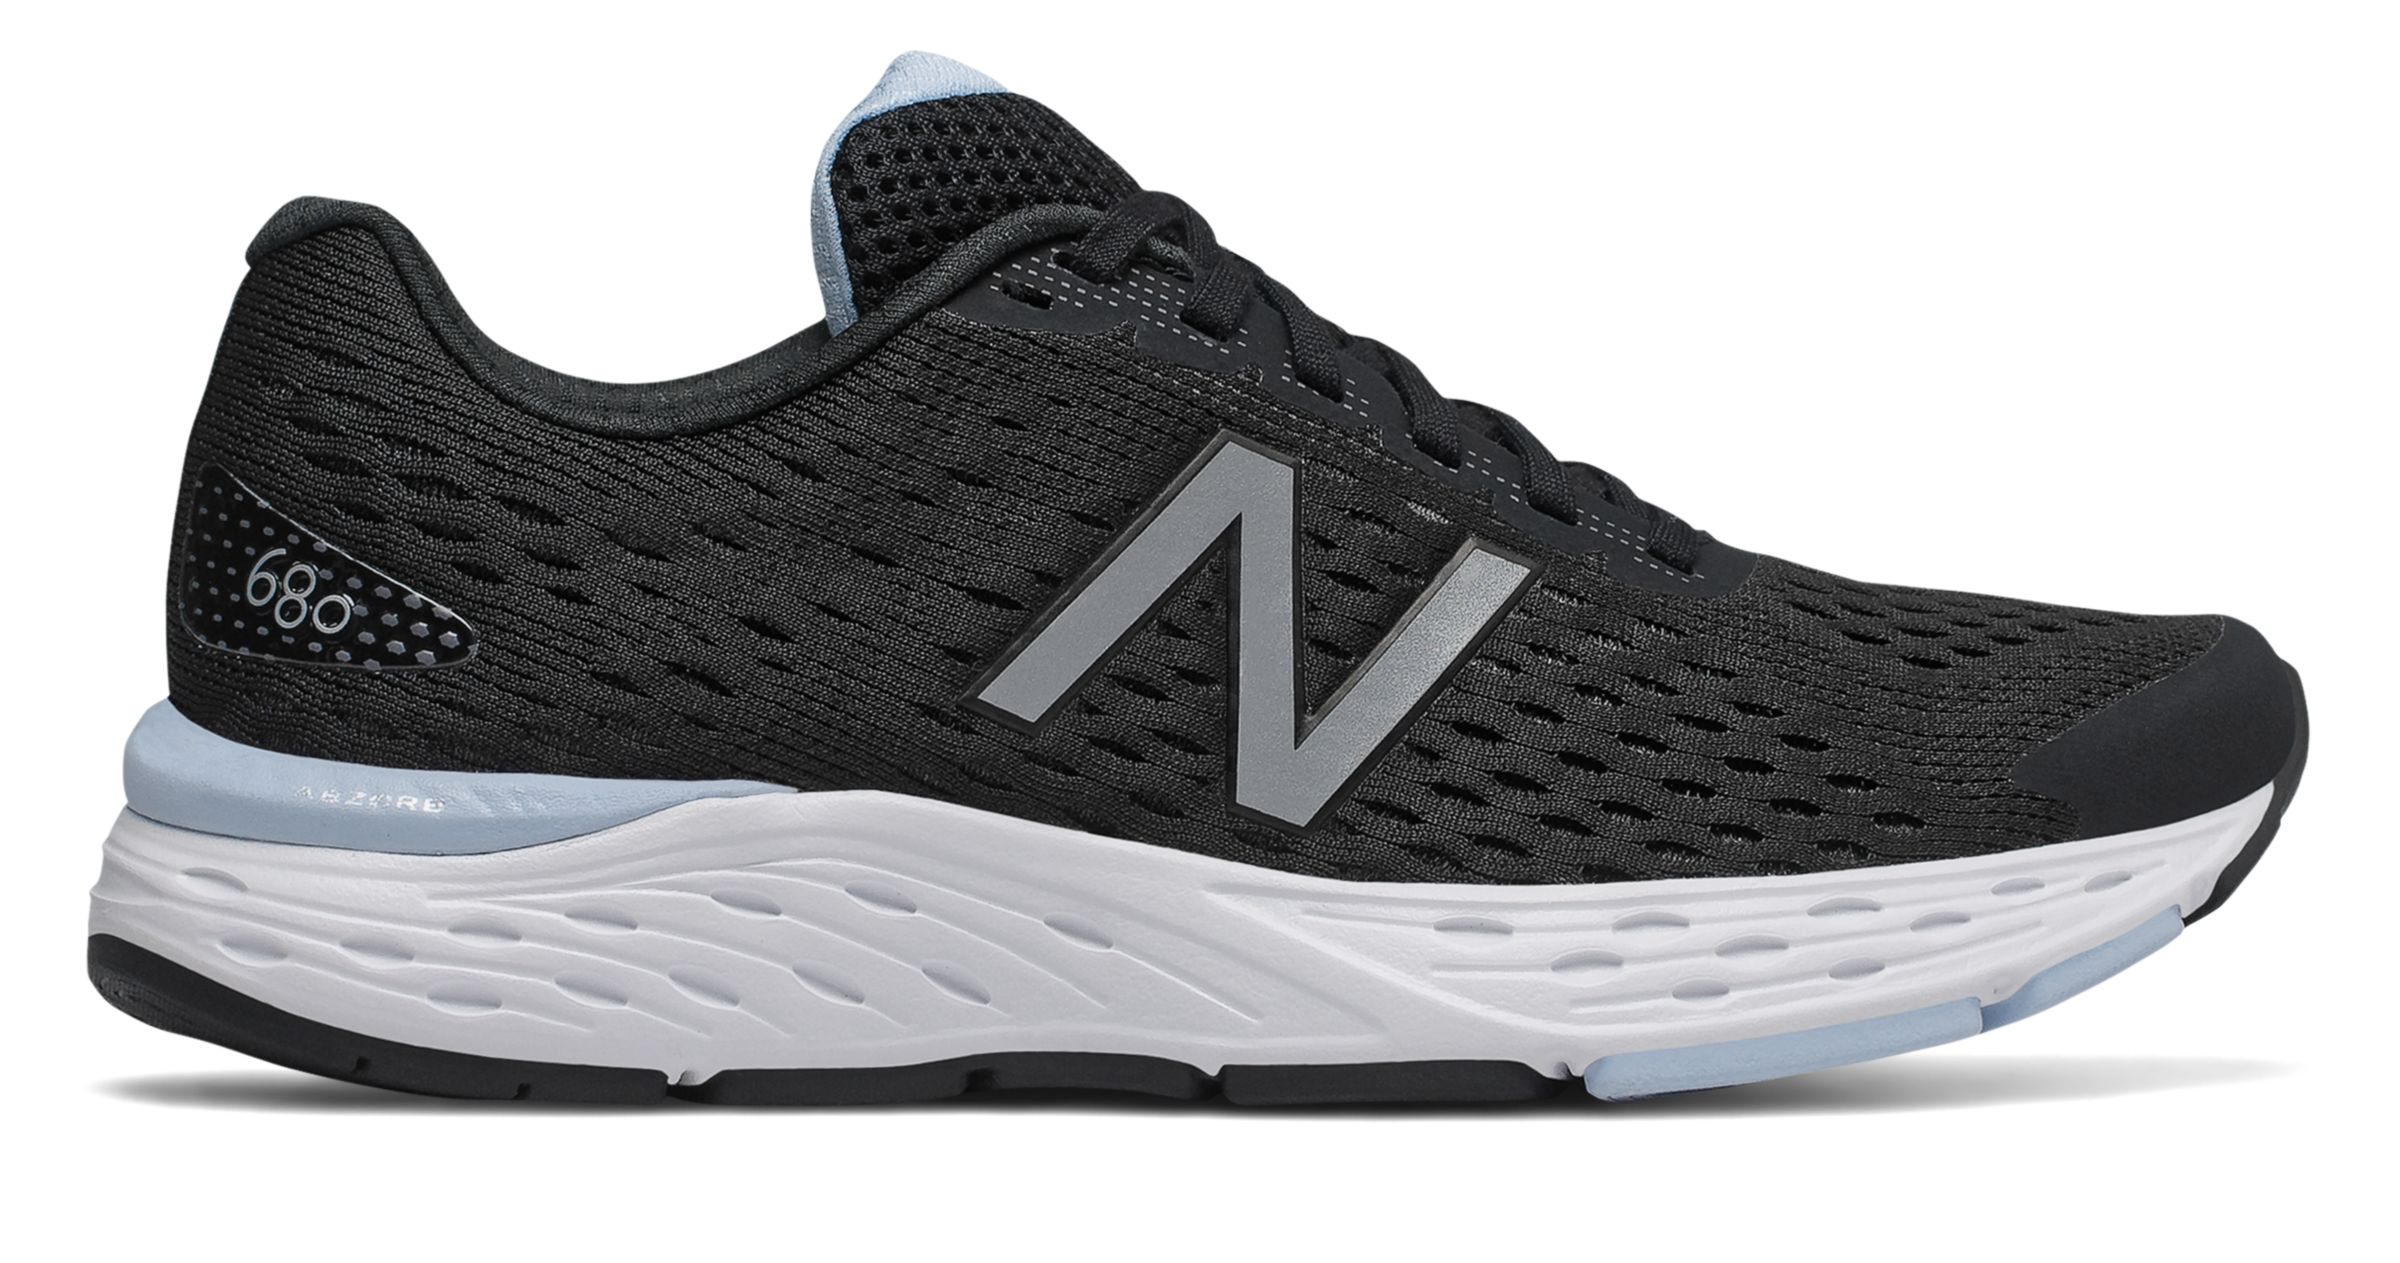 New Balance W680-V6 on Sale - Discounts Up to 42% Off on W680LK6 at Joe's New  Balance Outlet